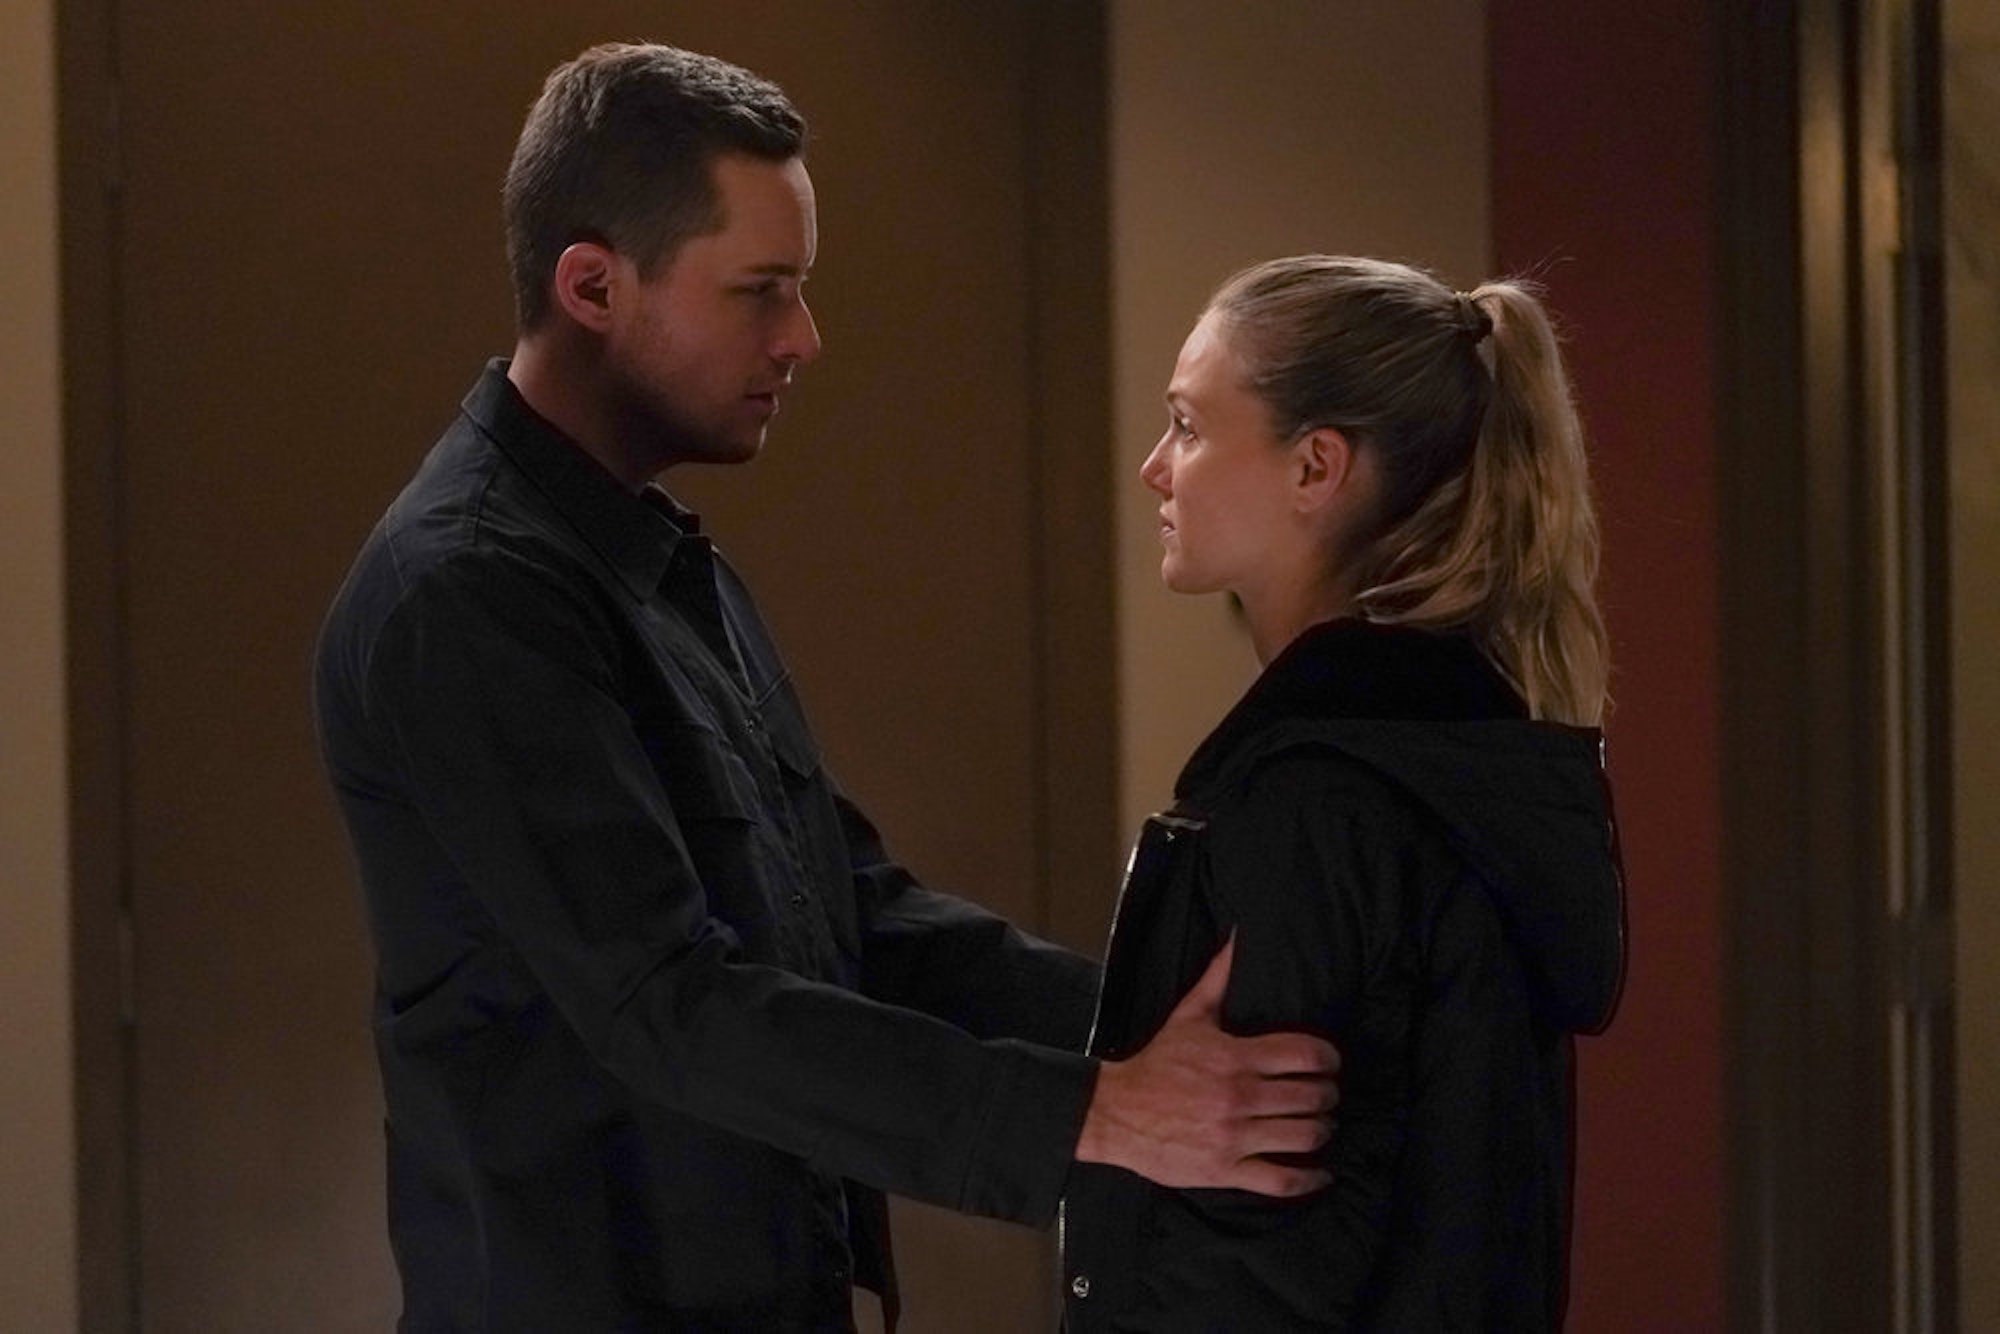 Jay Halstead and Hailey Upton in 'Chicago P.D.' Season 9. 'Chicago P.D.' Season 9 spoilers suggest Halstead and Upton get engaged during the premiere.